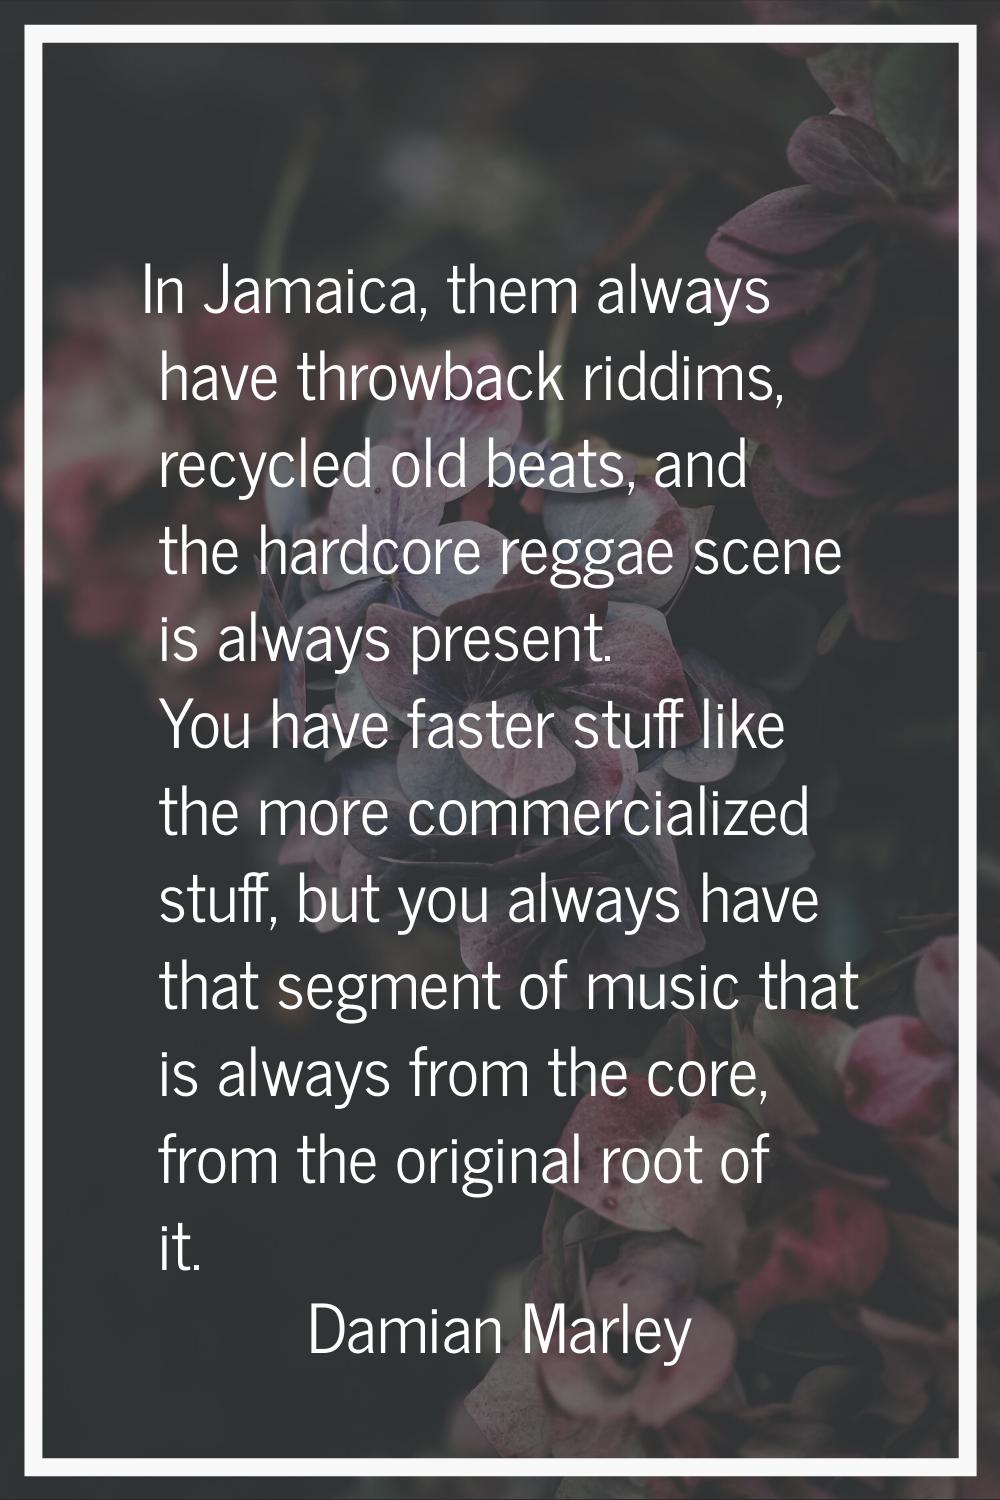 In Jamaica, them always have throwback riddims, recycled old beats, and the hardcore reggae scene i